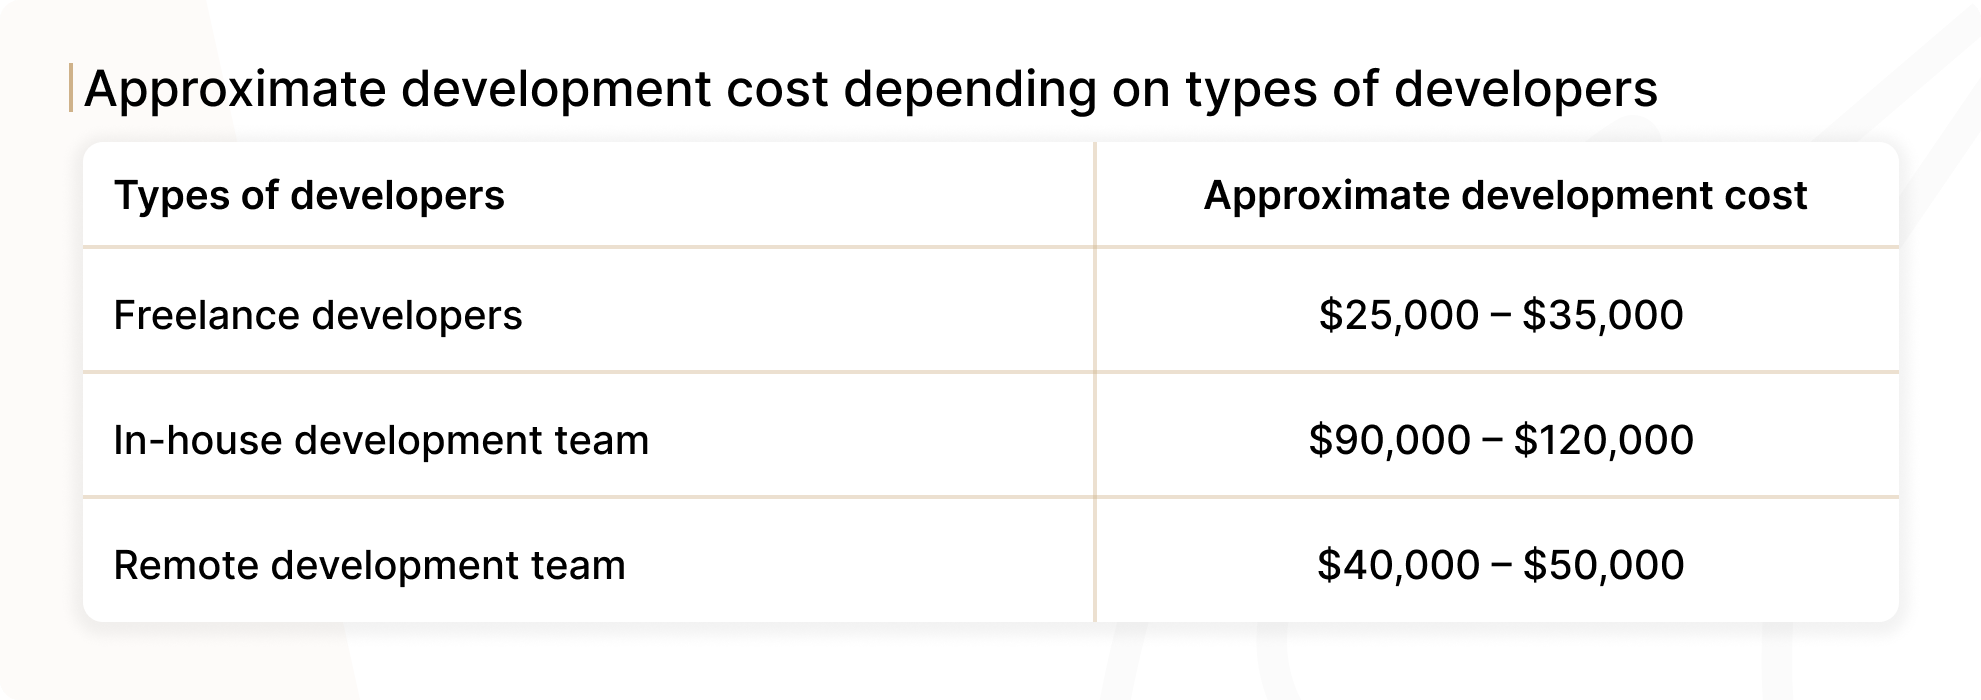 Approximate development cost depending on types of developers